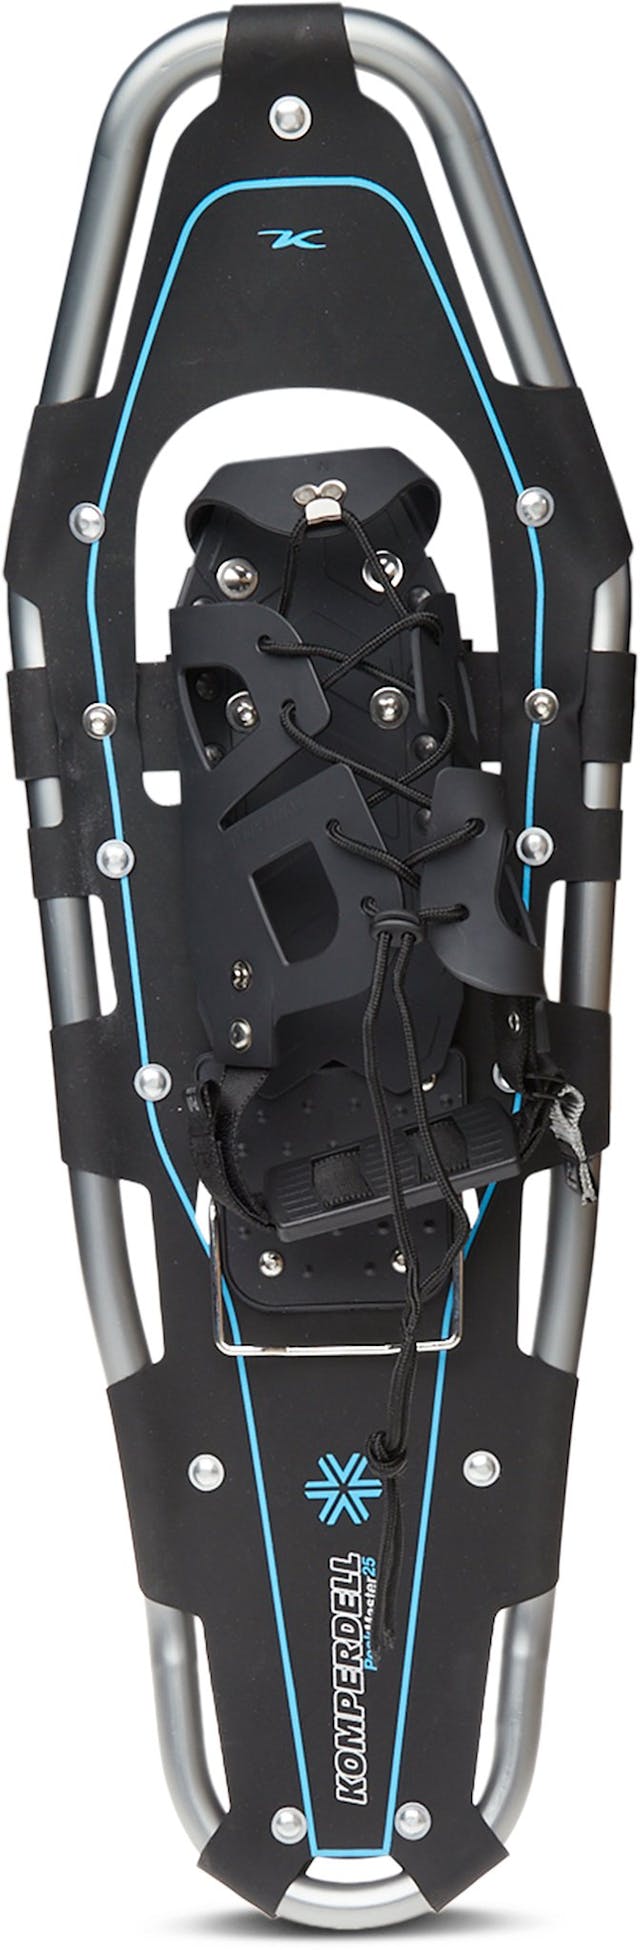 Product image for Peakmaster Snowshoes 25 in - Unisex